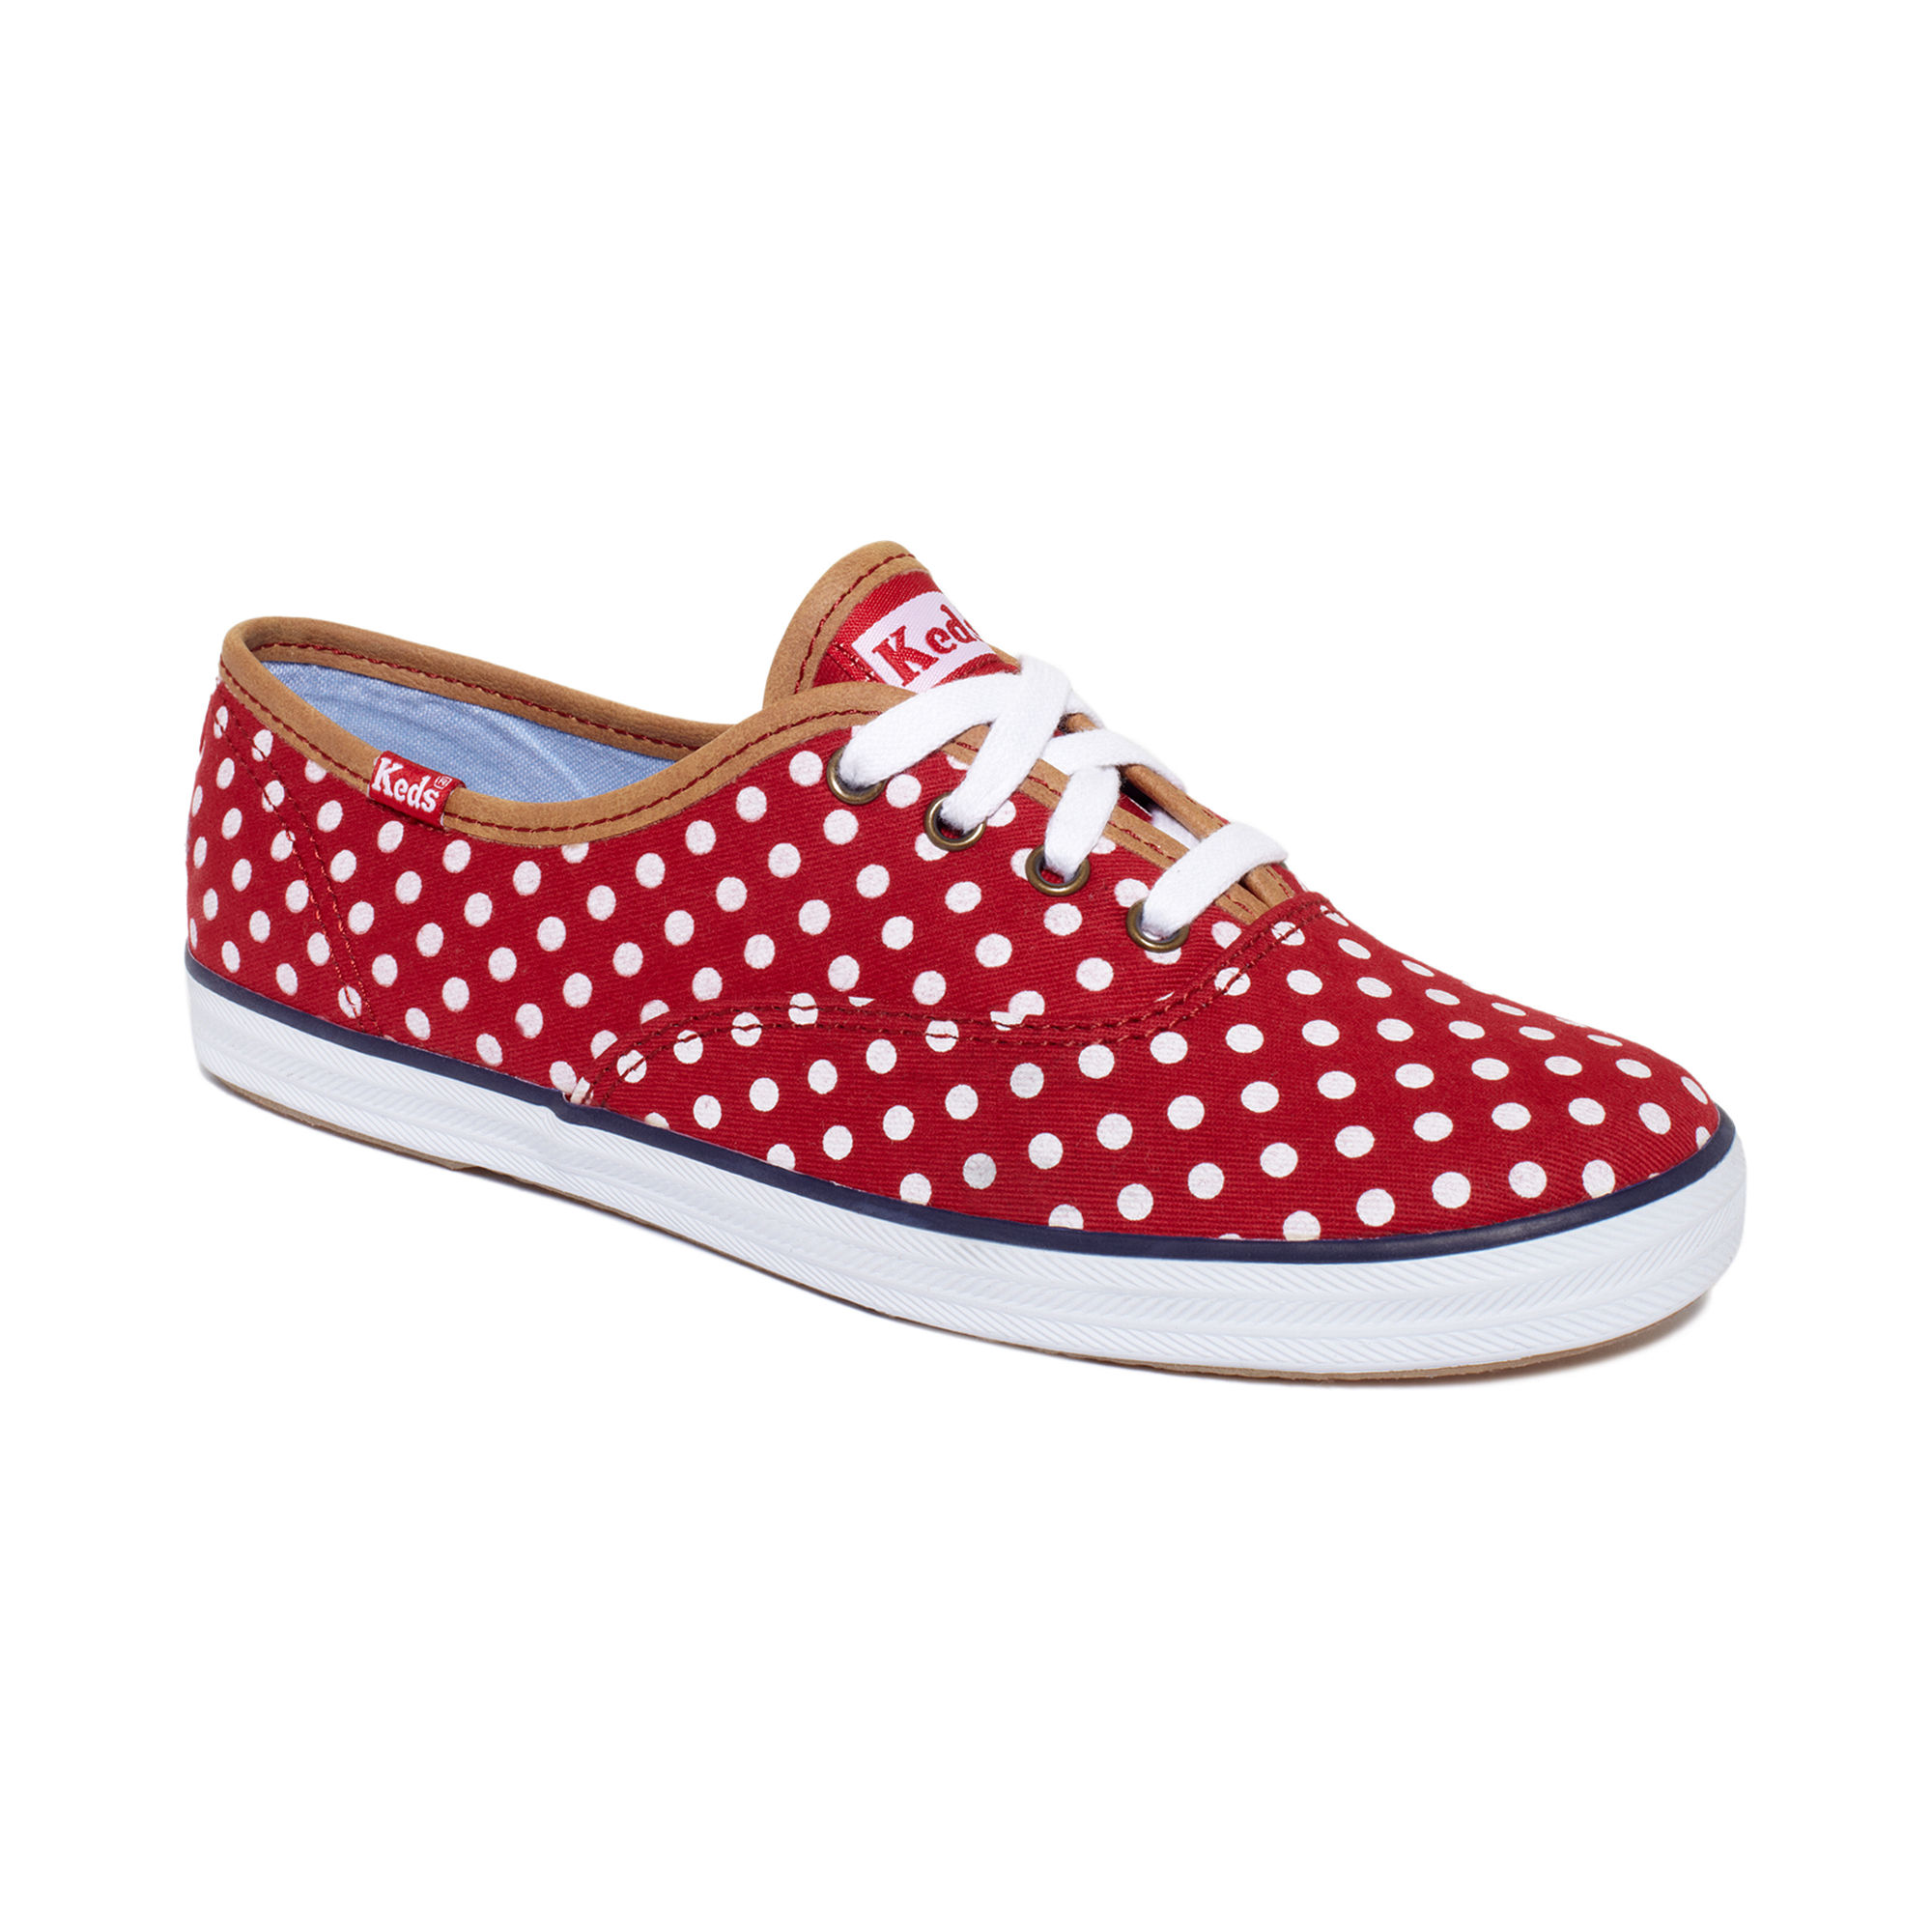 Keds Champion Dot Sneakers in Red | Lyst